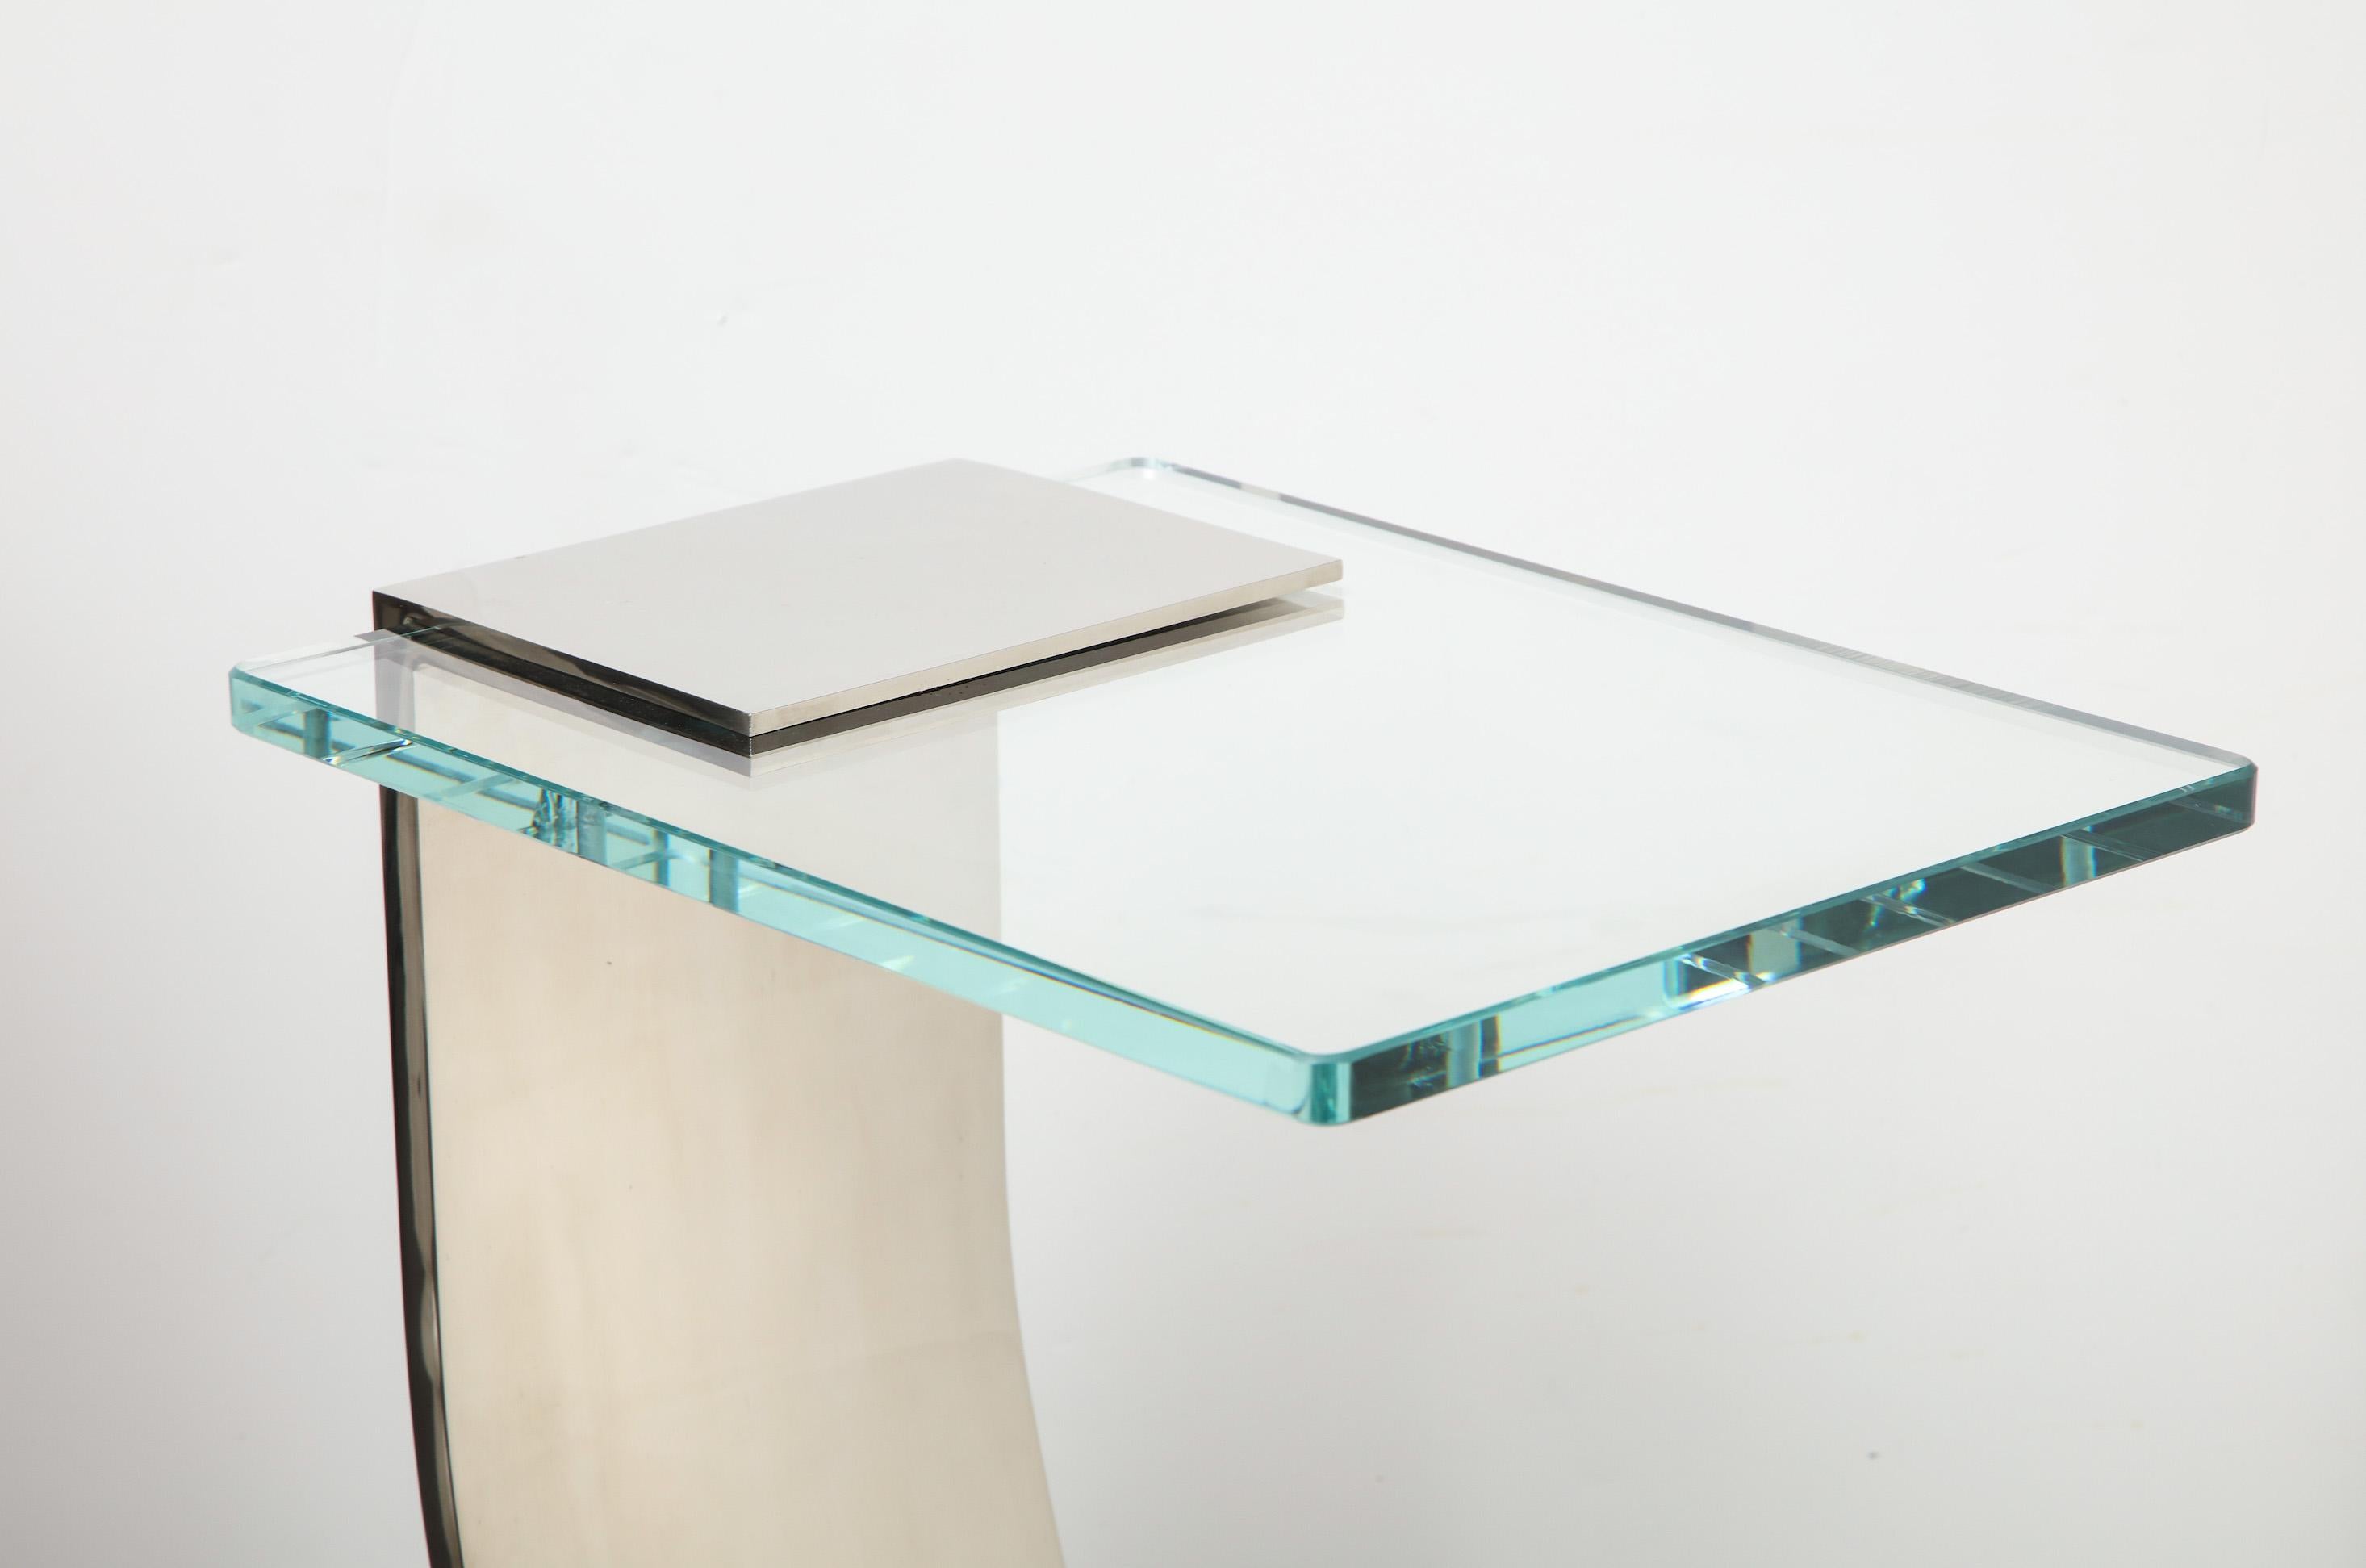 Custom nickel plated Z-table. This is a made-to-order table that is available in different sizes and finishes. There may be one table available now for sale in the size shown. 